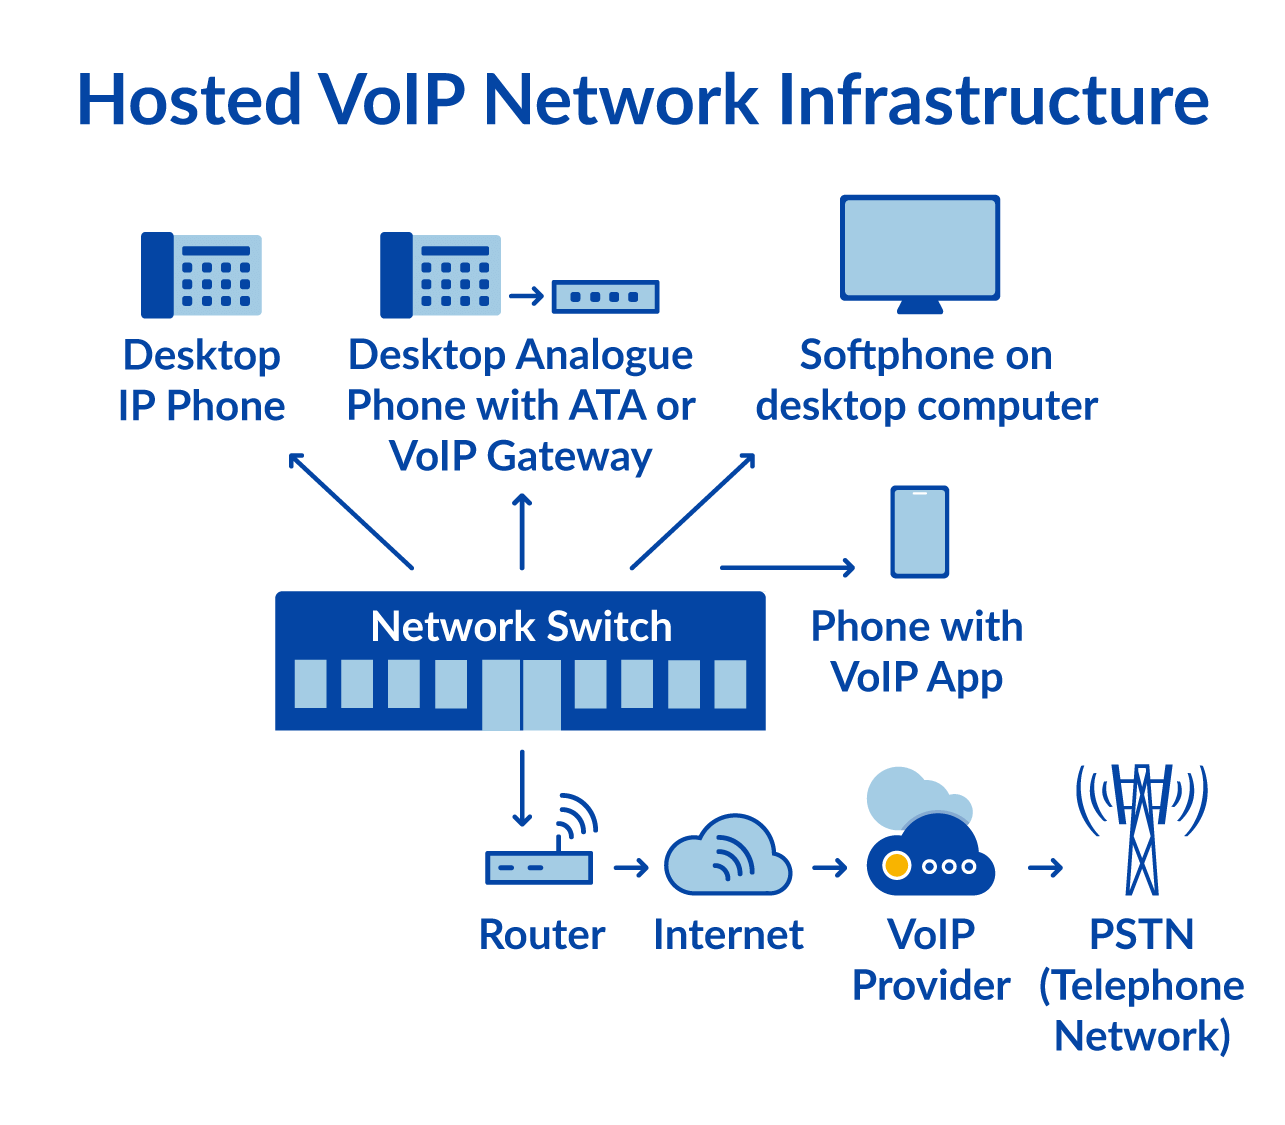 Hosted VoIP Network Infrastructure